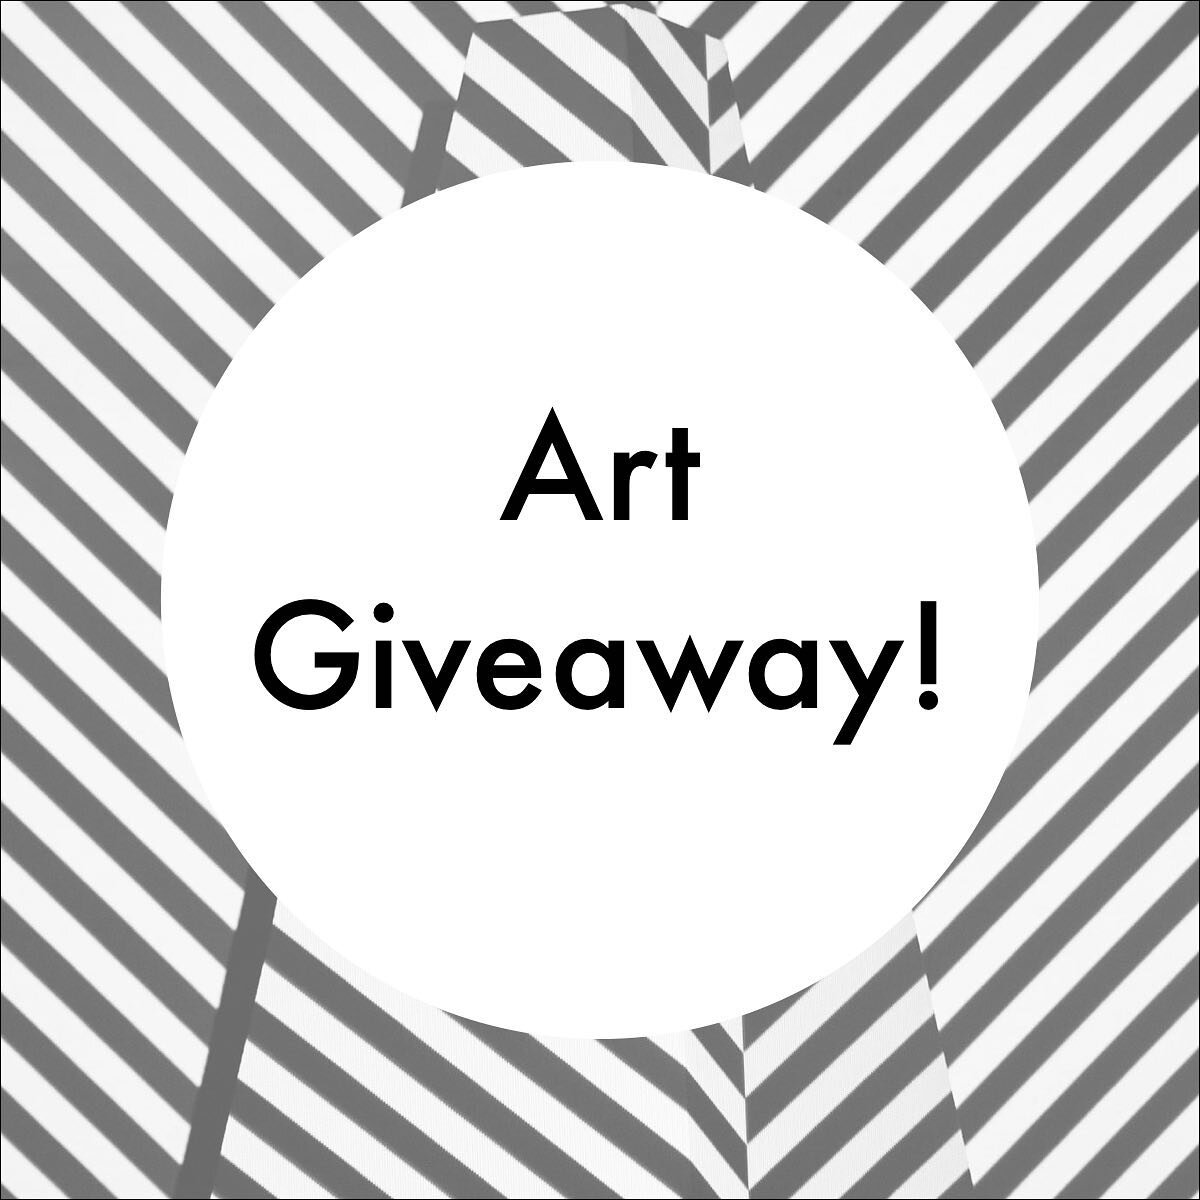 It&rsquo;s #artgiveaway time! Why? Because it&rsquo;s summer. And because I wanna. 🌱To enter all you have to do is comment and tag a friend. The winner will get two packs of cards&mdash;one to keep and one to gift (swipe to see your options). Tag as